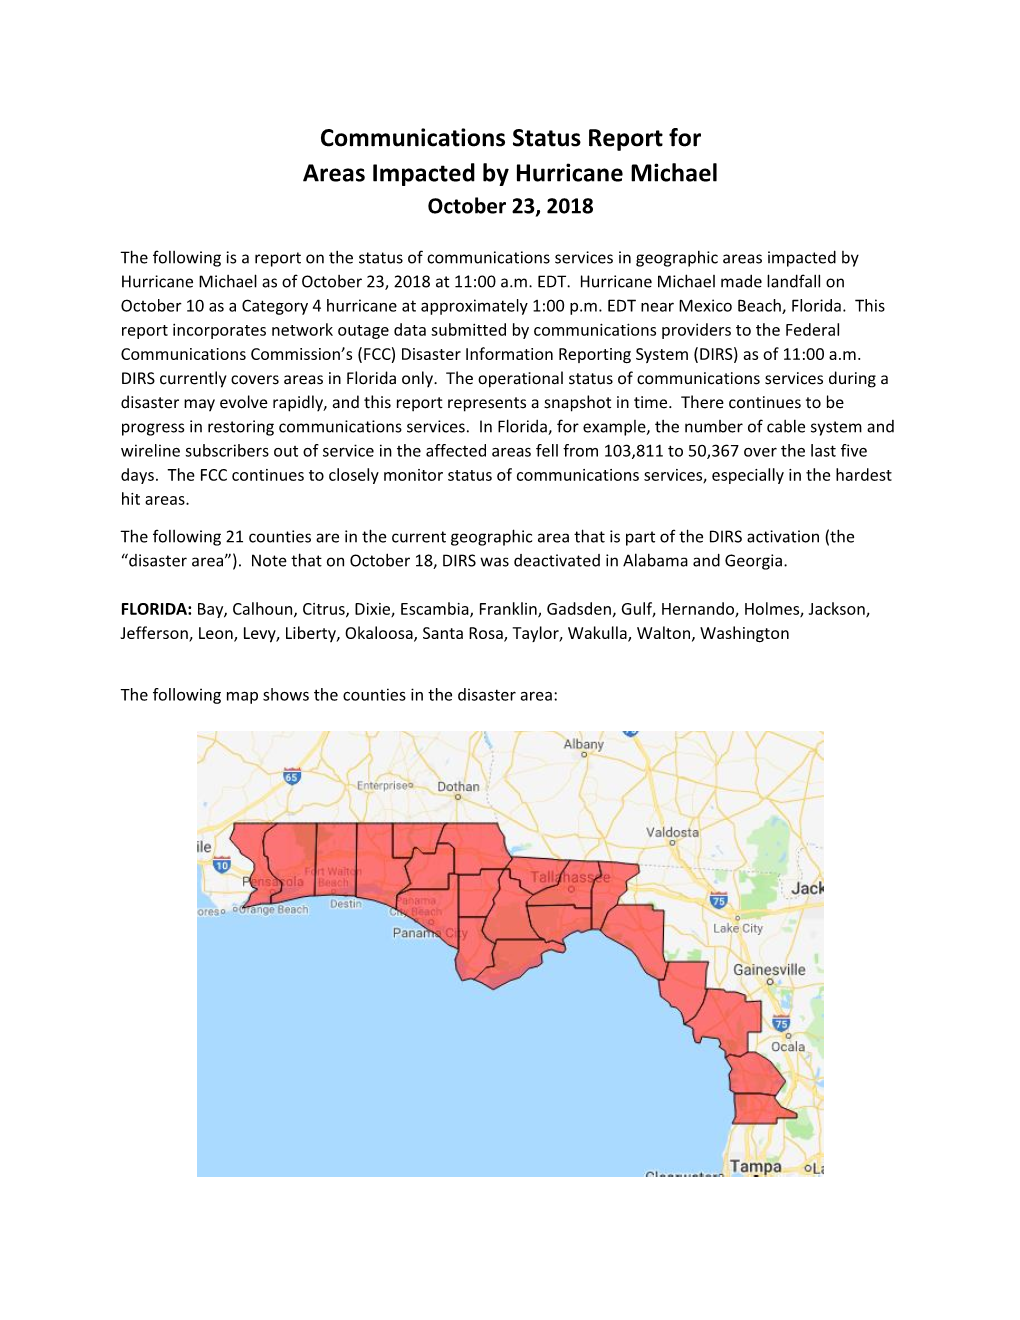 Communications Status Report for Areas Impacted by Hurricane Michael October 23, 2018